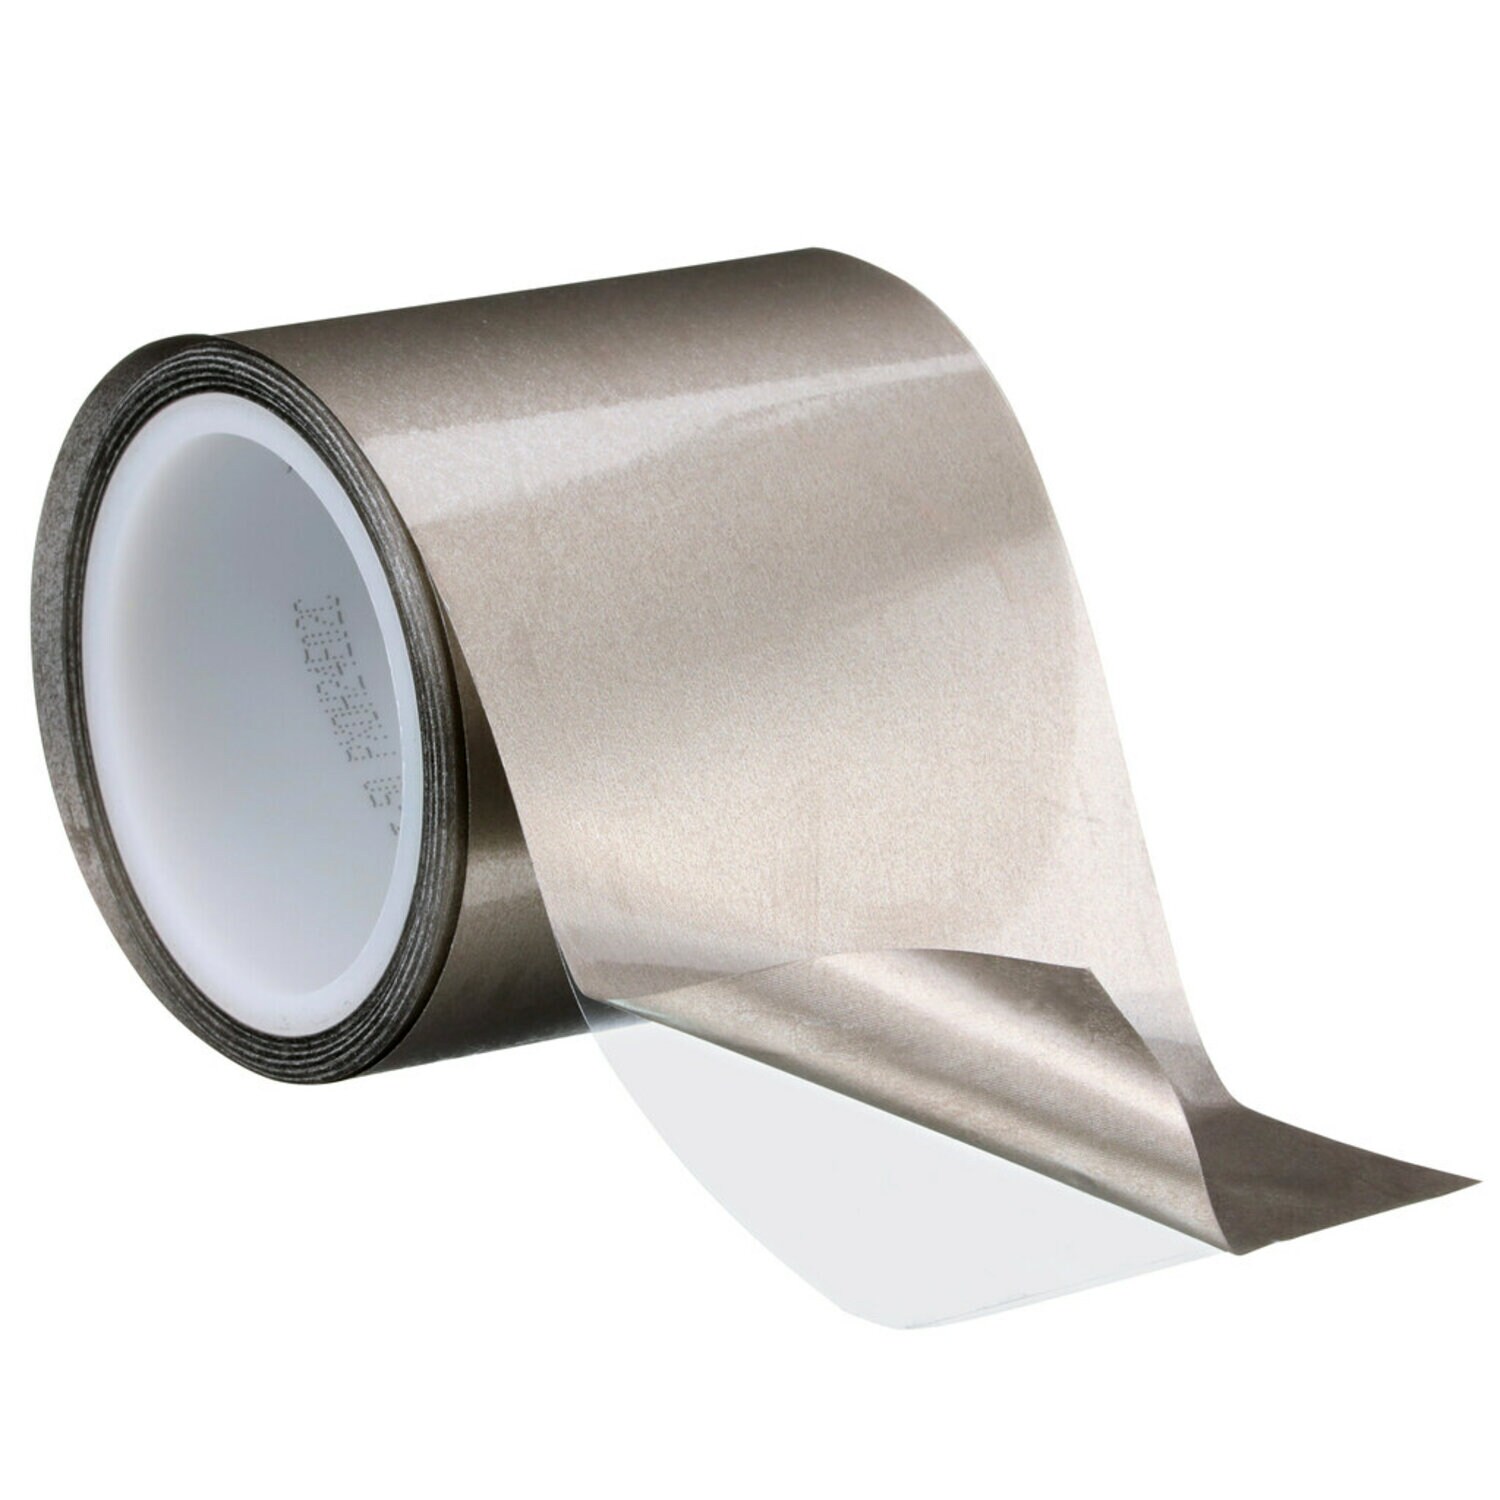 7100313597 - 3M Electrically Conductive Double-Sided Tape 5113DFT-50, Grey, 210 mm x 10 m, 4 Rolls/Case, Sample